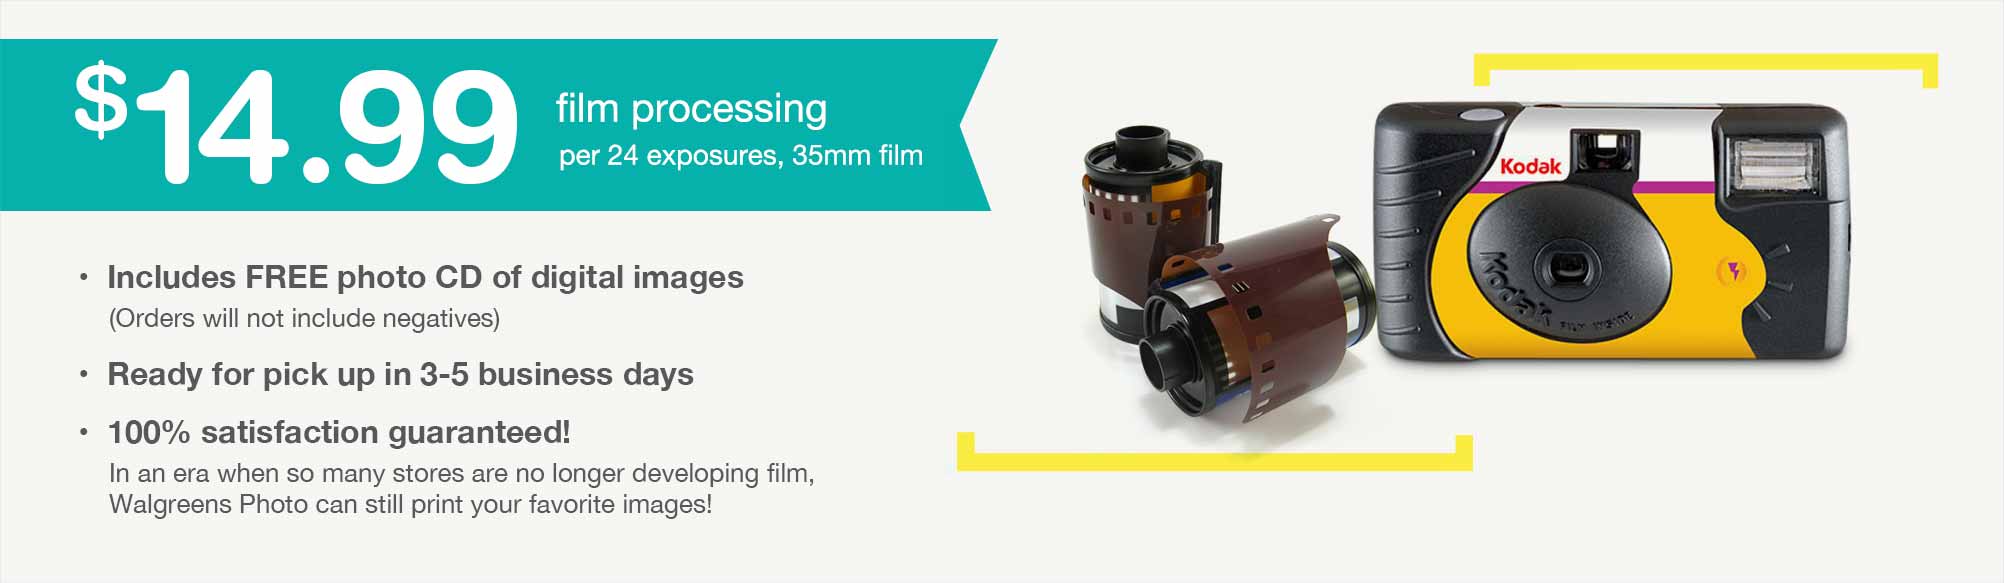 $14.99 Film Processing per 24 exposures, 35mm film. Includes FREE photo CD of digital images. (Orders will not include negatives) Ready for pick up in 3-5 business days. 100% satisfaction guaranteed!